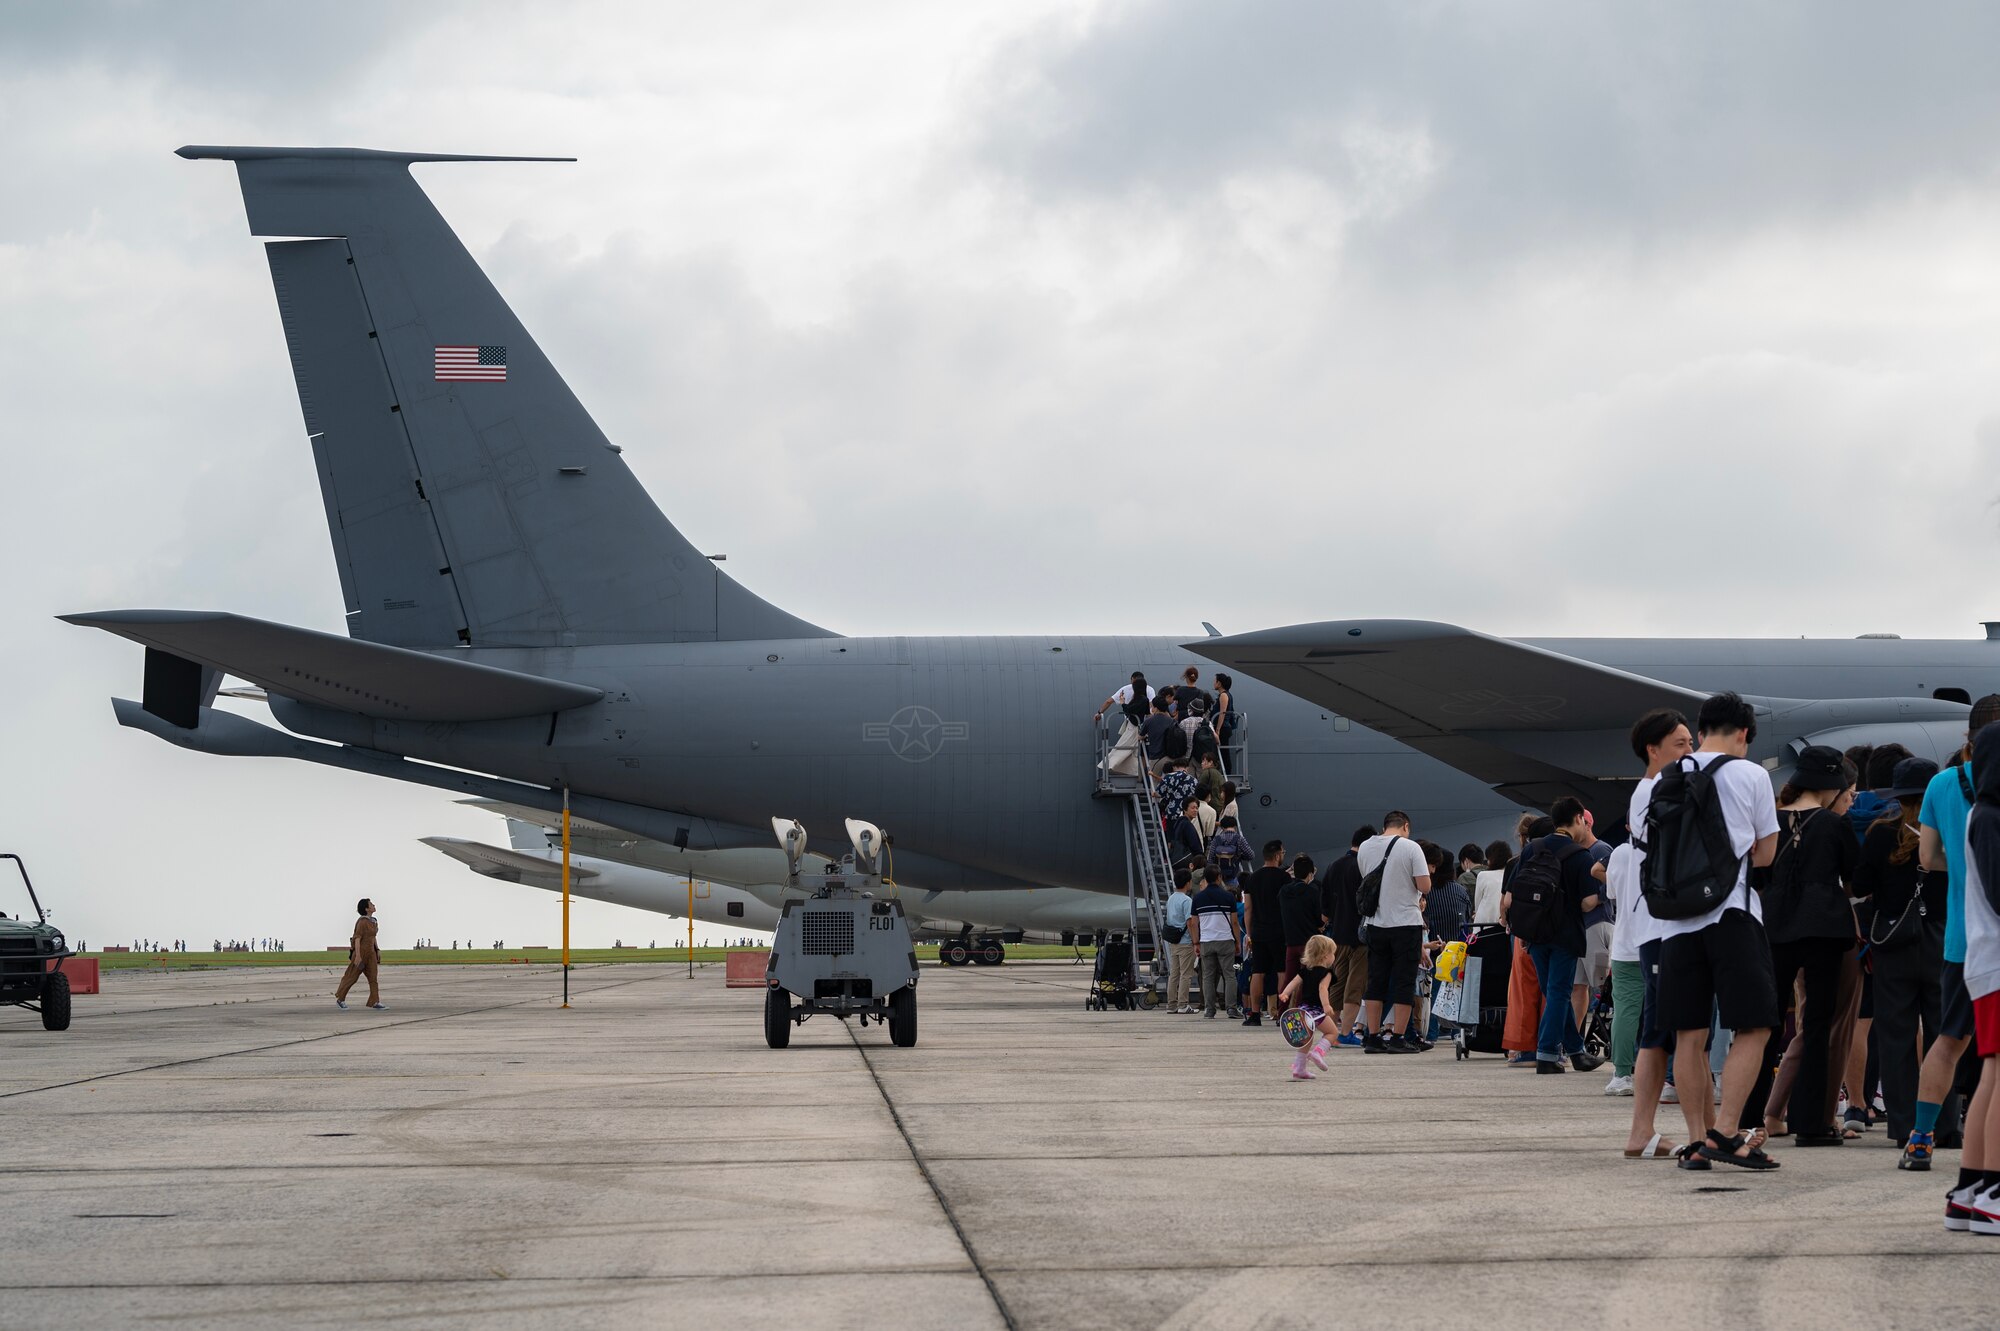 Festival attendees line up to tour a U.S. Air Force KC-135 Stratotanker static display during America Fest 2023 at Kadena Air Base, Japan, April 22, 2023. The two-day event was open to the public and enabled attendees to learn about the U.S. military’s role in keeping the Indo-Pacific region free and open. (U.S. Air Force photo by Senior Airman Jessi Roth)